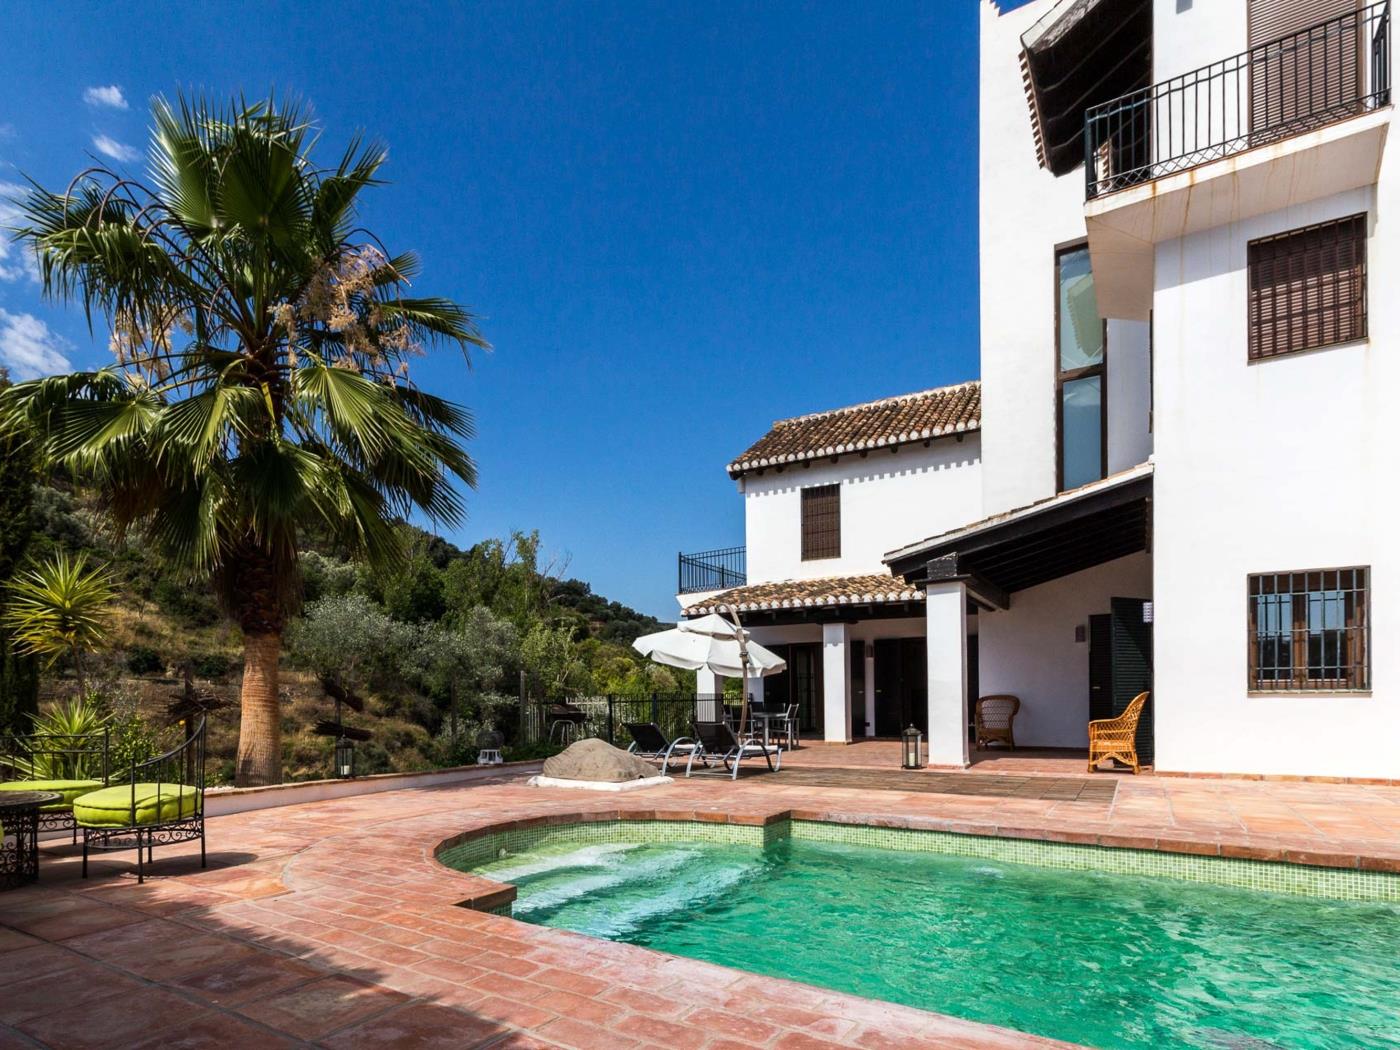 Magnificent house with pool, garden and views in Saleres